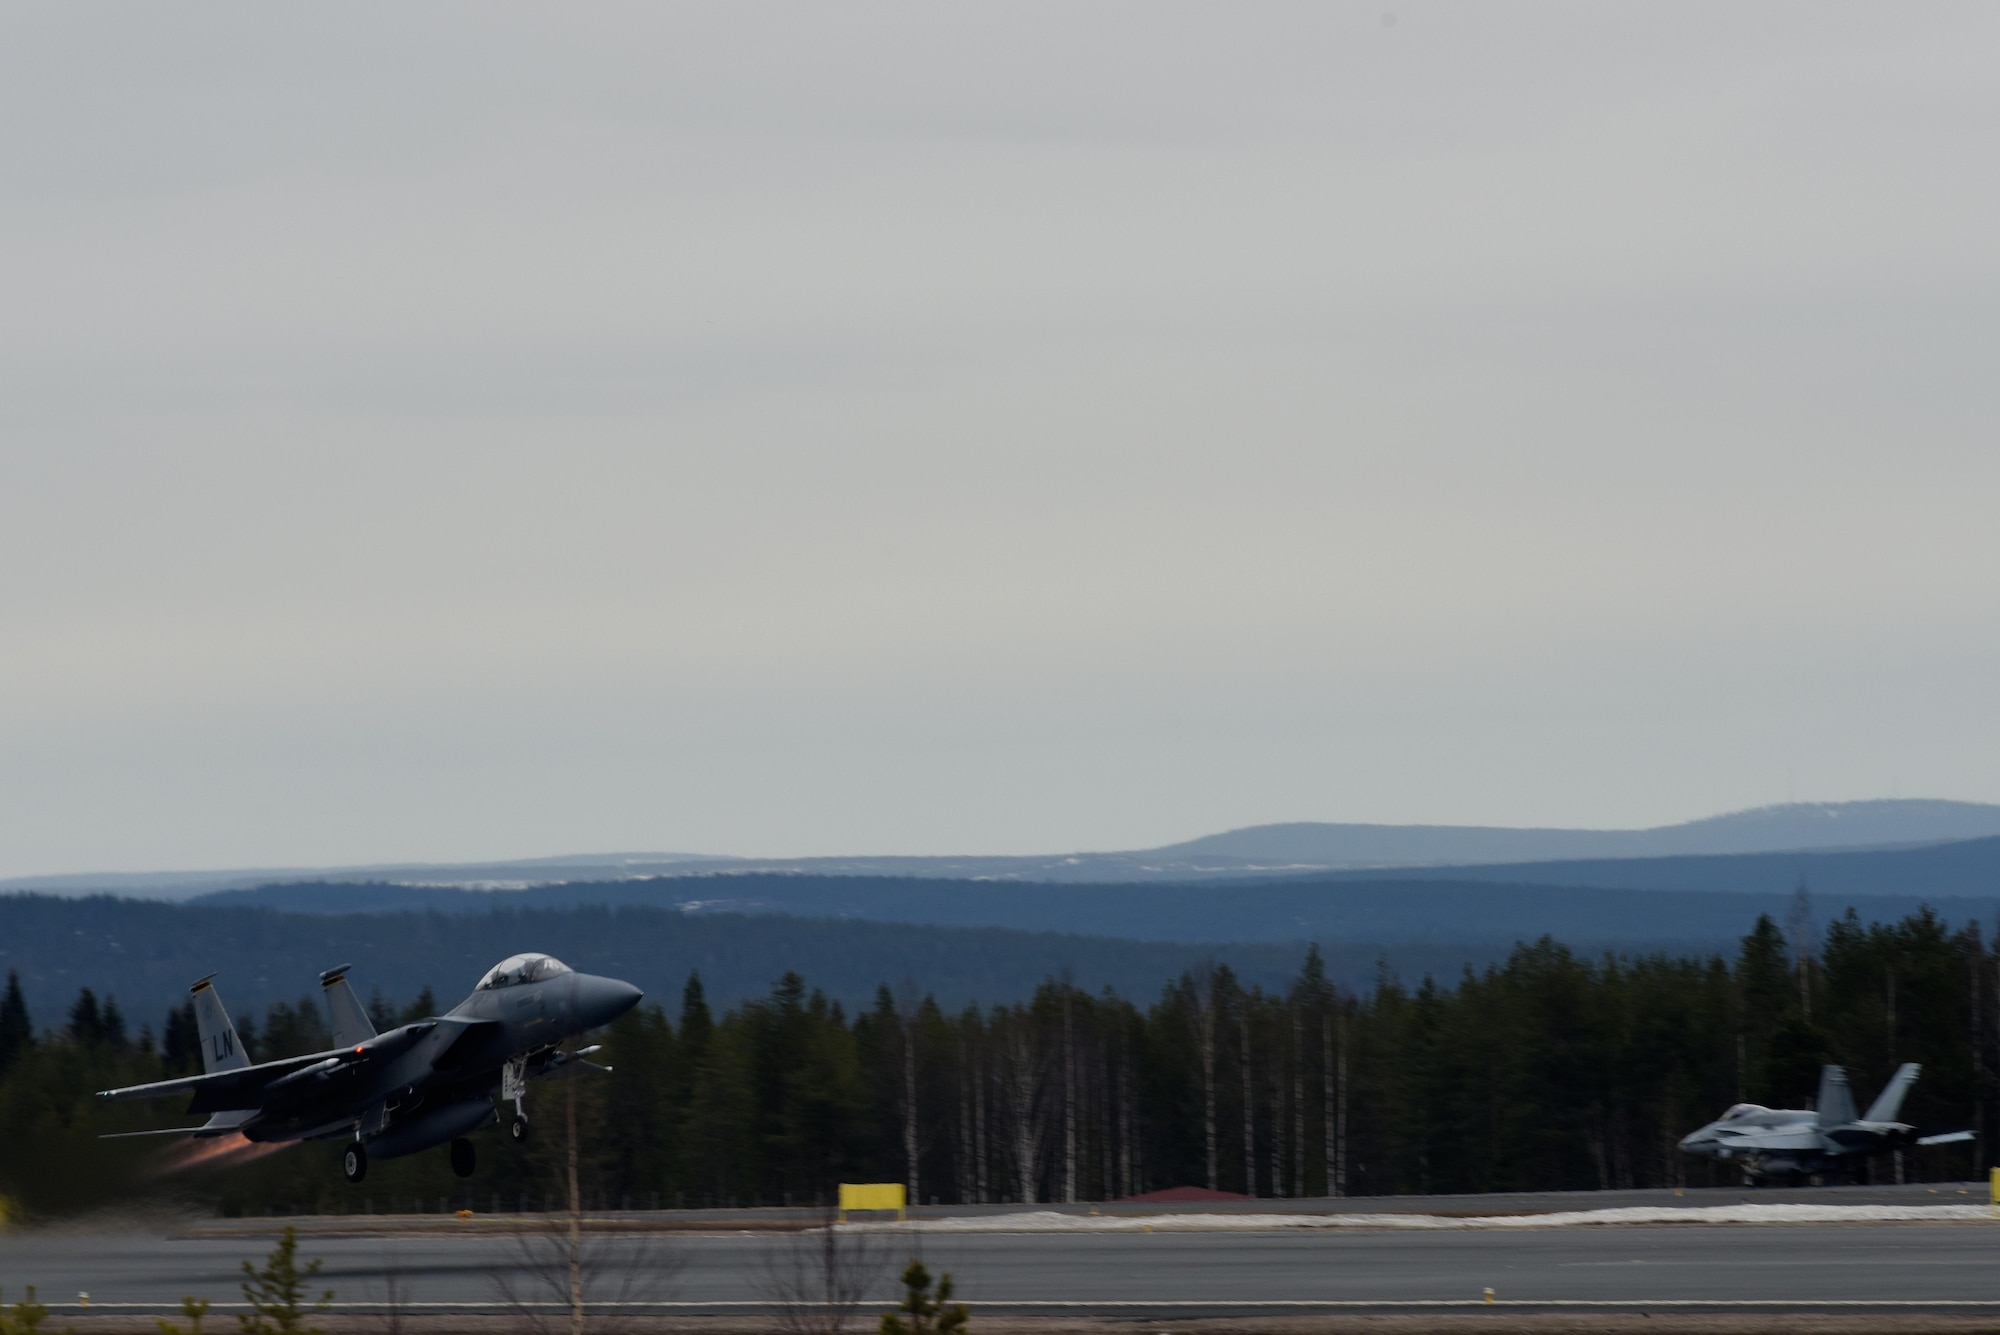 A 493rd Fighter Squadron F-15C Eagle from the 48th Fighter Wing at Royal Air Force Lakenheath, England, takes off from Rovaniemi Air Base, Finland, May 22, in support of Arctic Challenge 2017. Multinational exercises such as ACE 17 are opportunities for the U.S. to continue developing its strong relationship with European allies and partners. (U.S. Air Force photo/Airman 1st Class Abby L. Finkel)